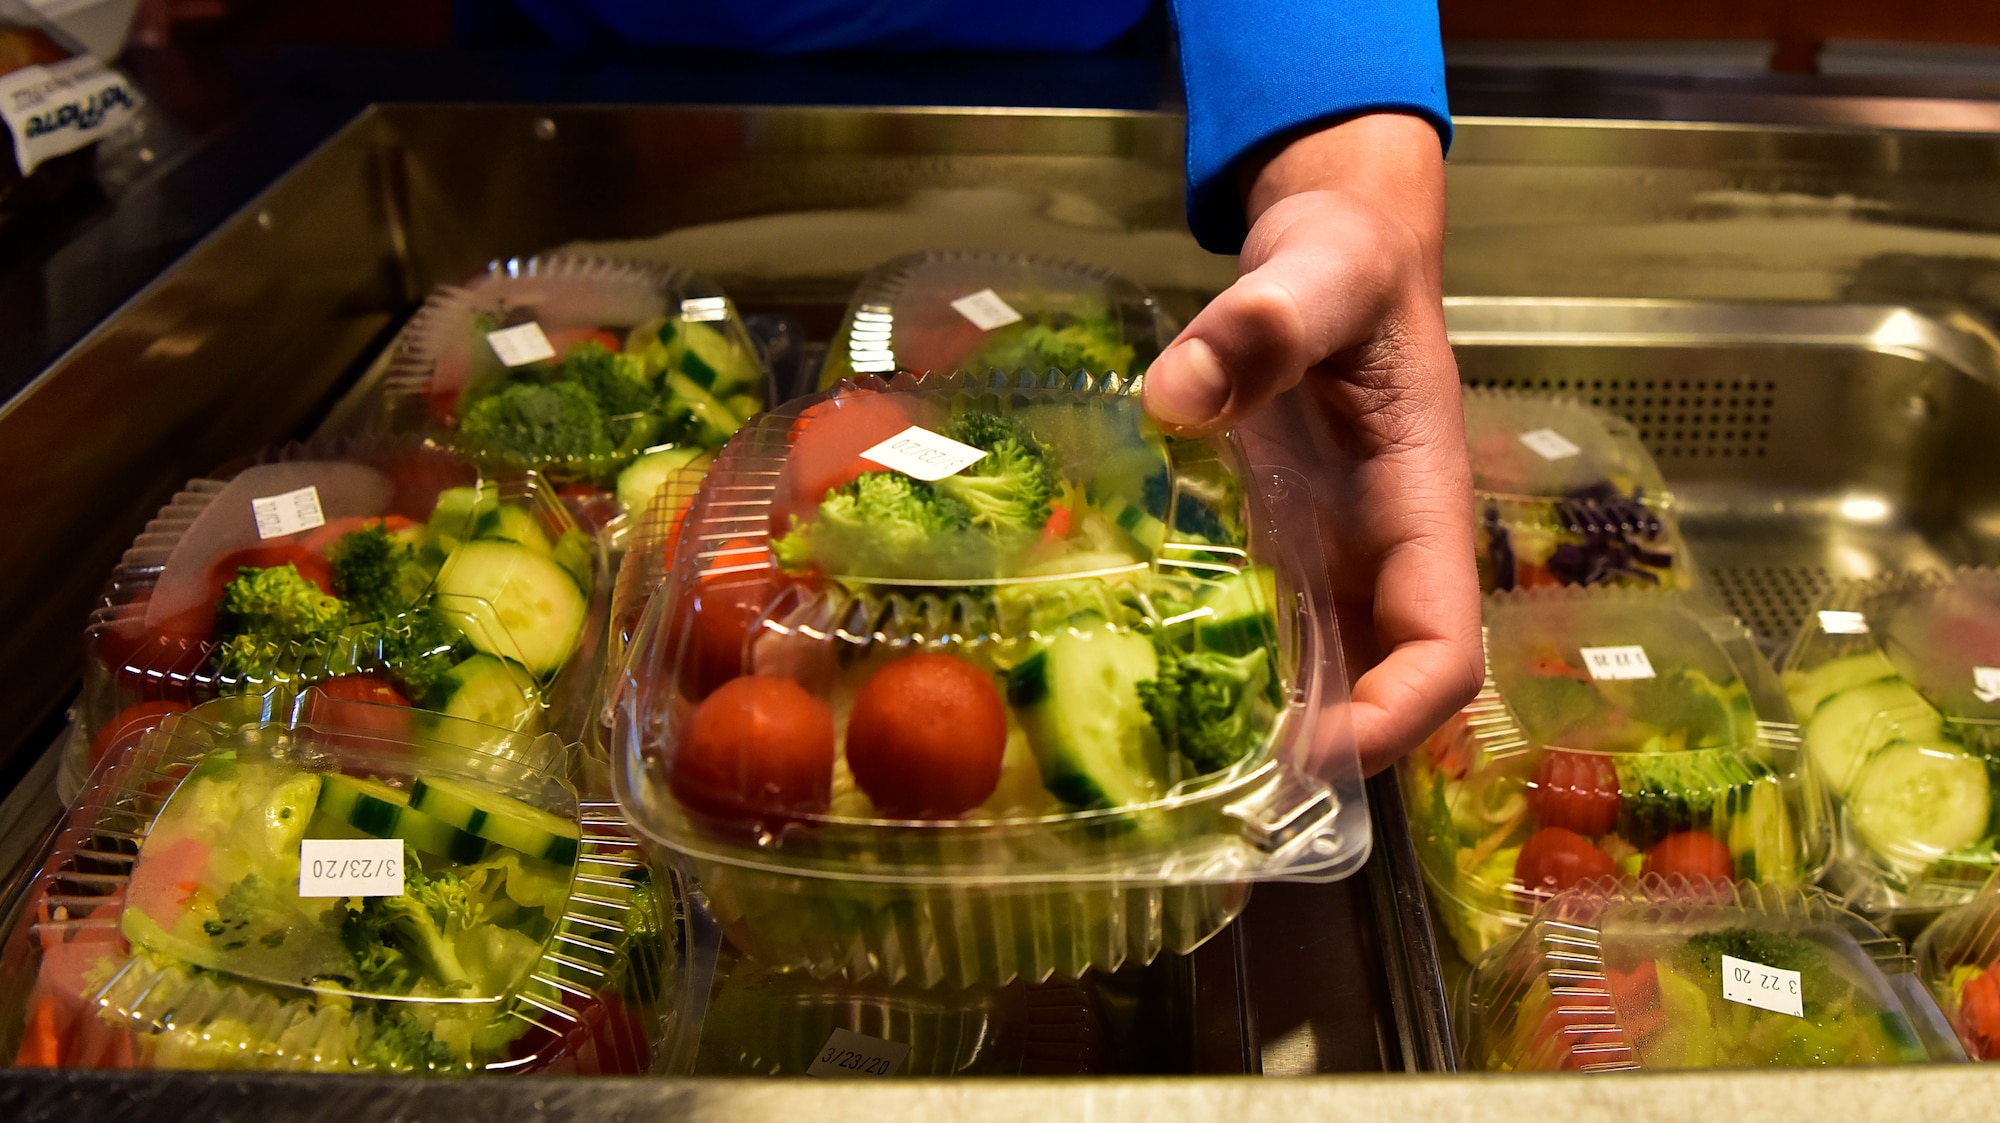 A 354th Fighter Wing Airman grabs a to-go salad from the Two Seasons Dining Facility on Eielson Air Force Base, Alaska, March 21, 2020. The installation has banned all dining in at food establishments on base in an effort to enforce social distancing and mitigate the spread of the novel coronavirus. Patrons are still able to order food to carry out. (U.S. Air Force photo by Senior Airman Beaux Hebert)